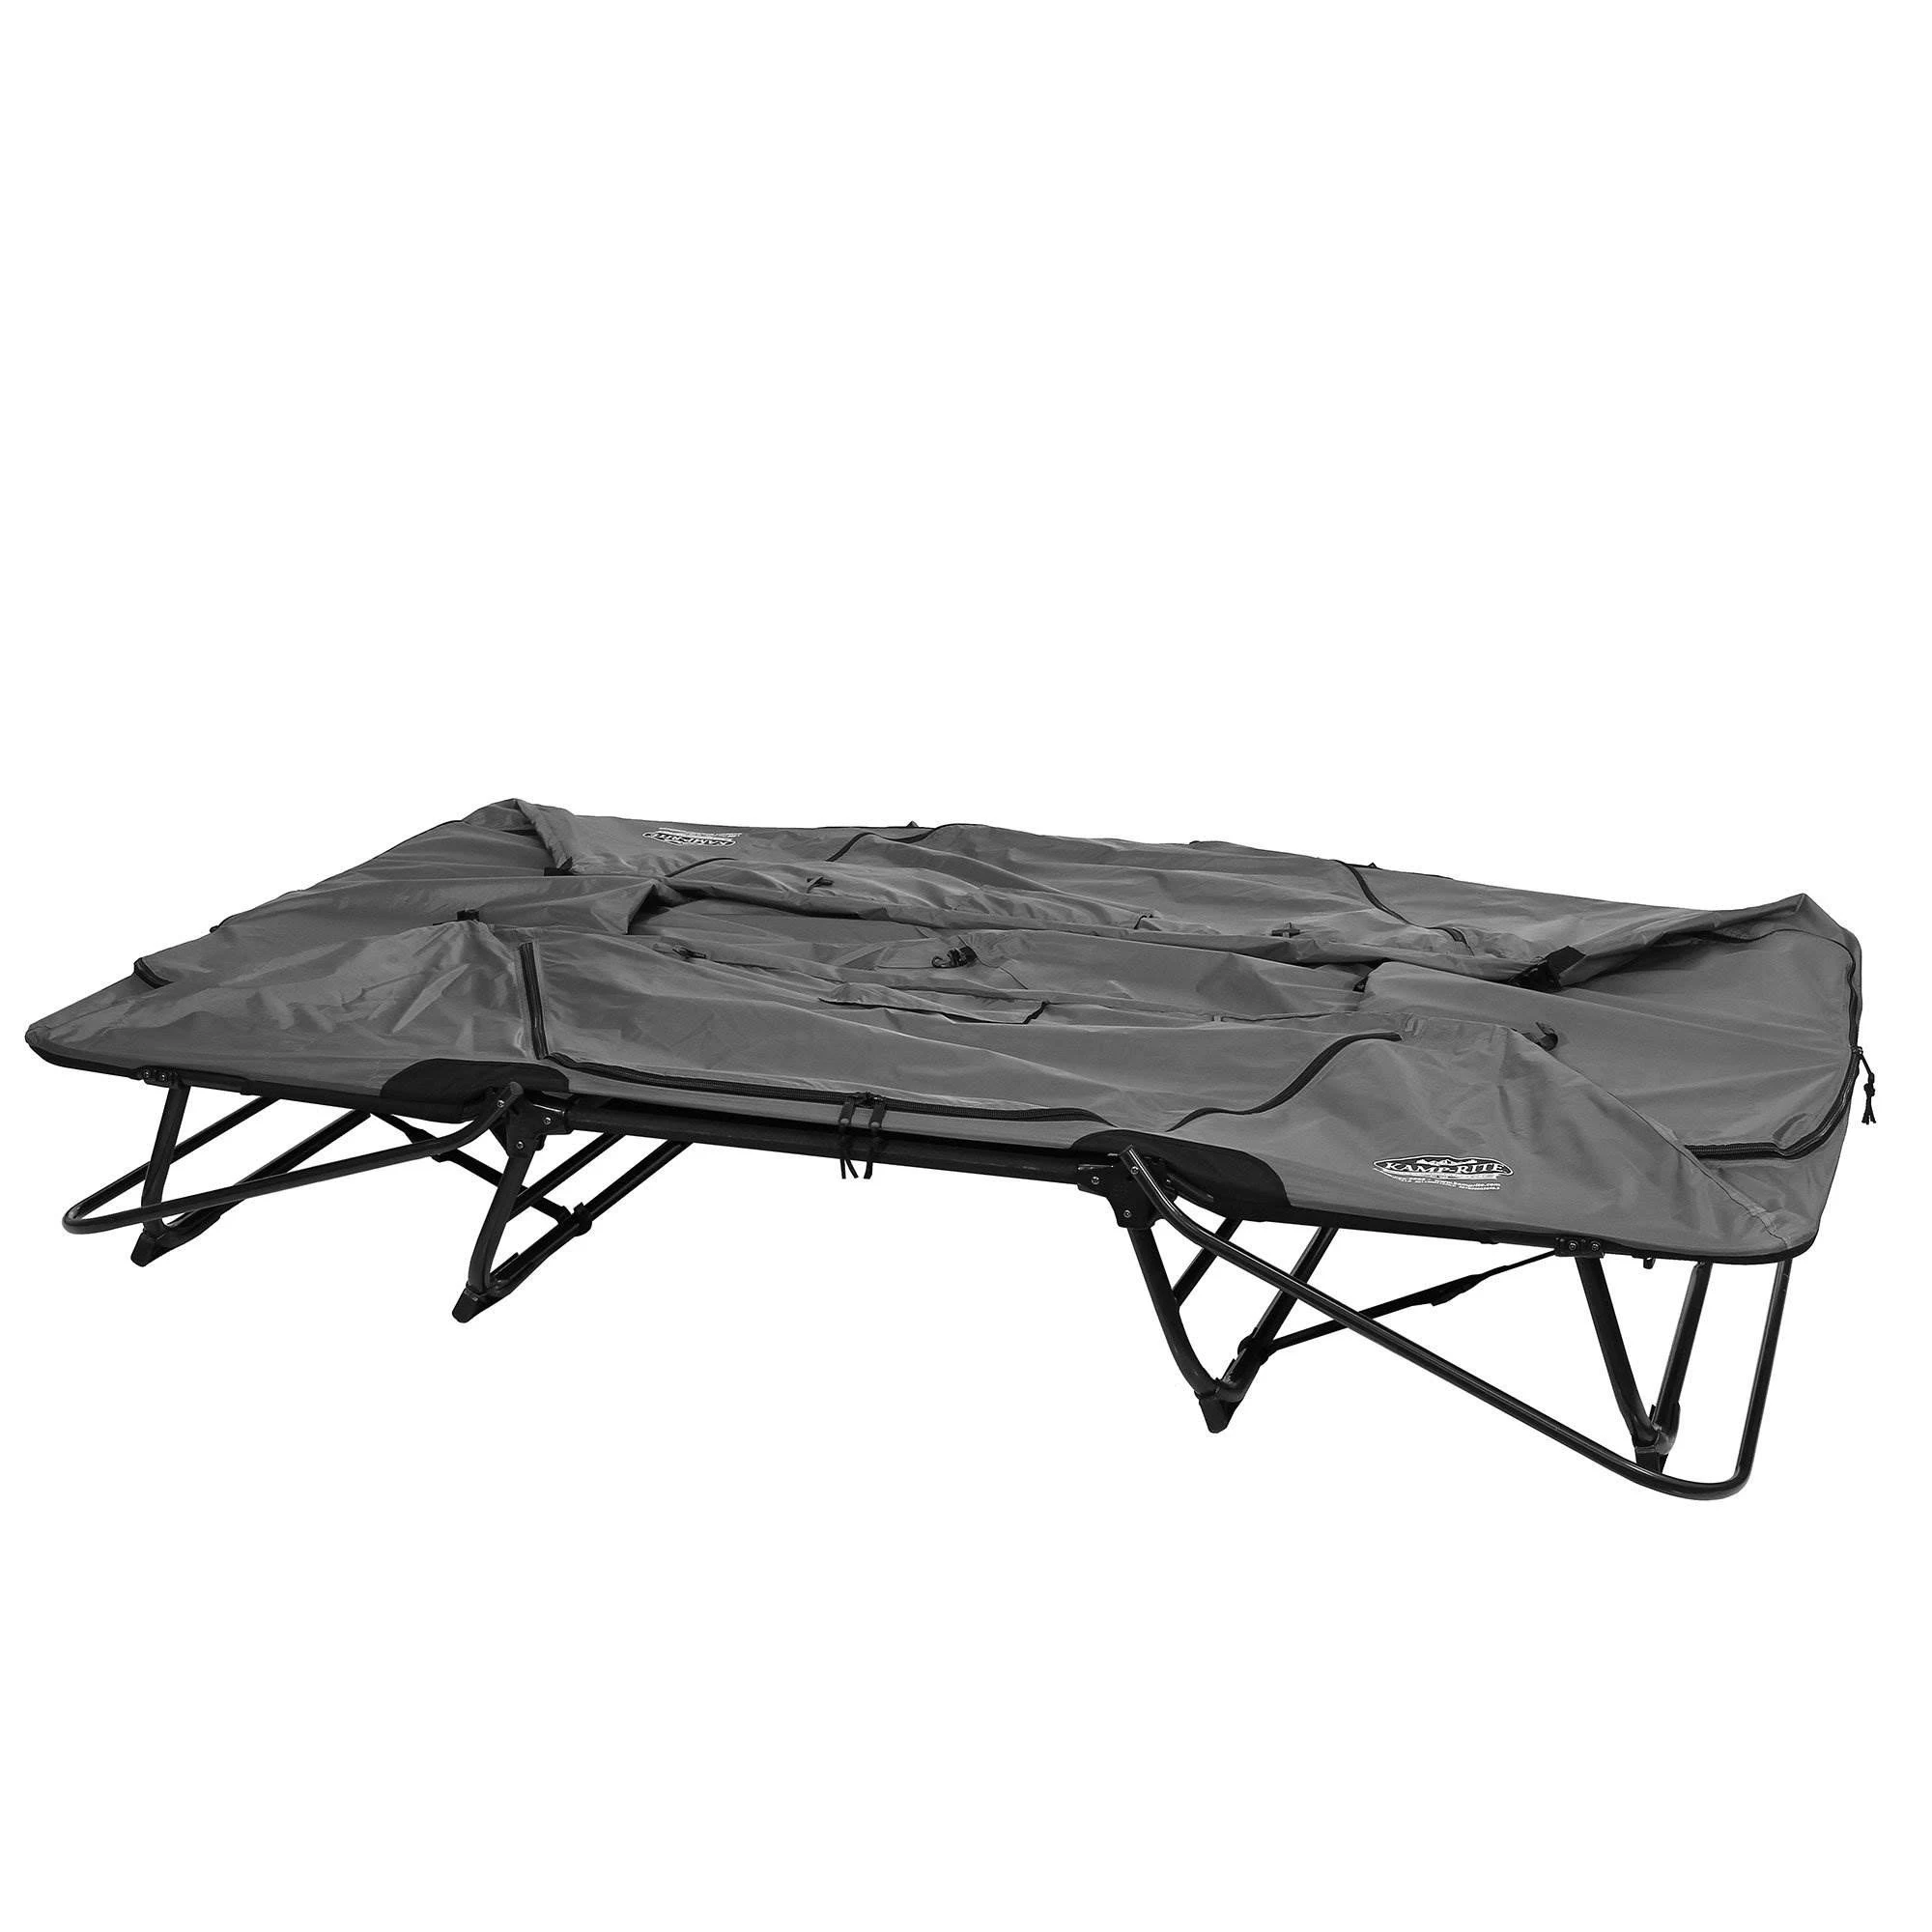 Kamp-Rite 2 Person Folding Off The Ground Camping Bed Double Tent Cot Gray